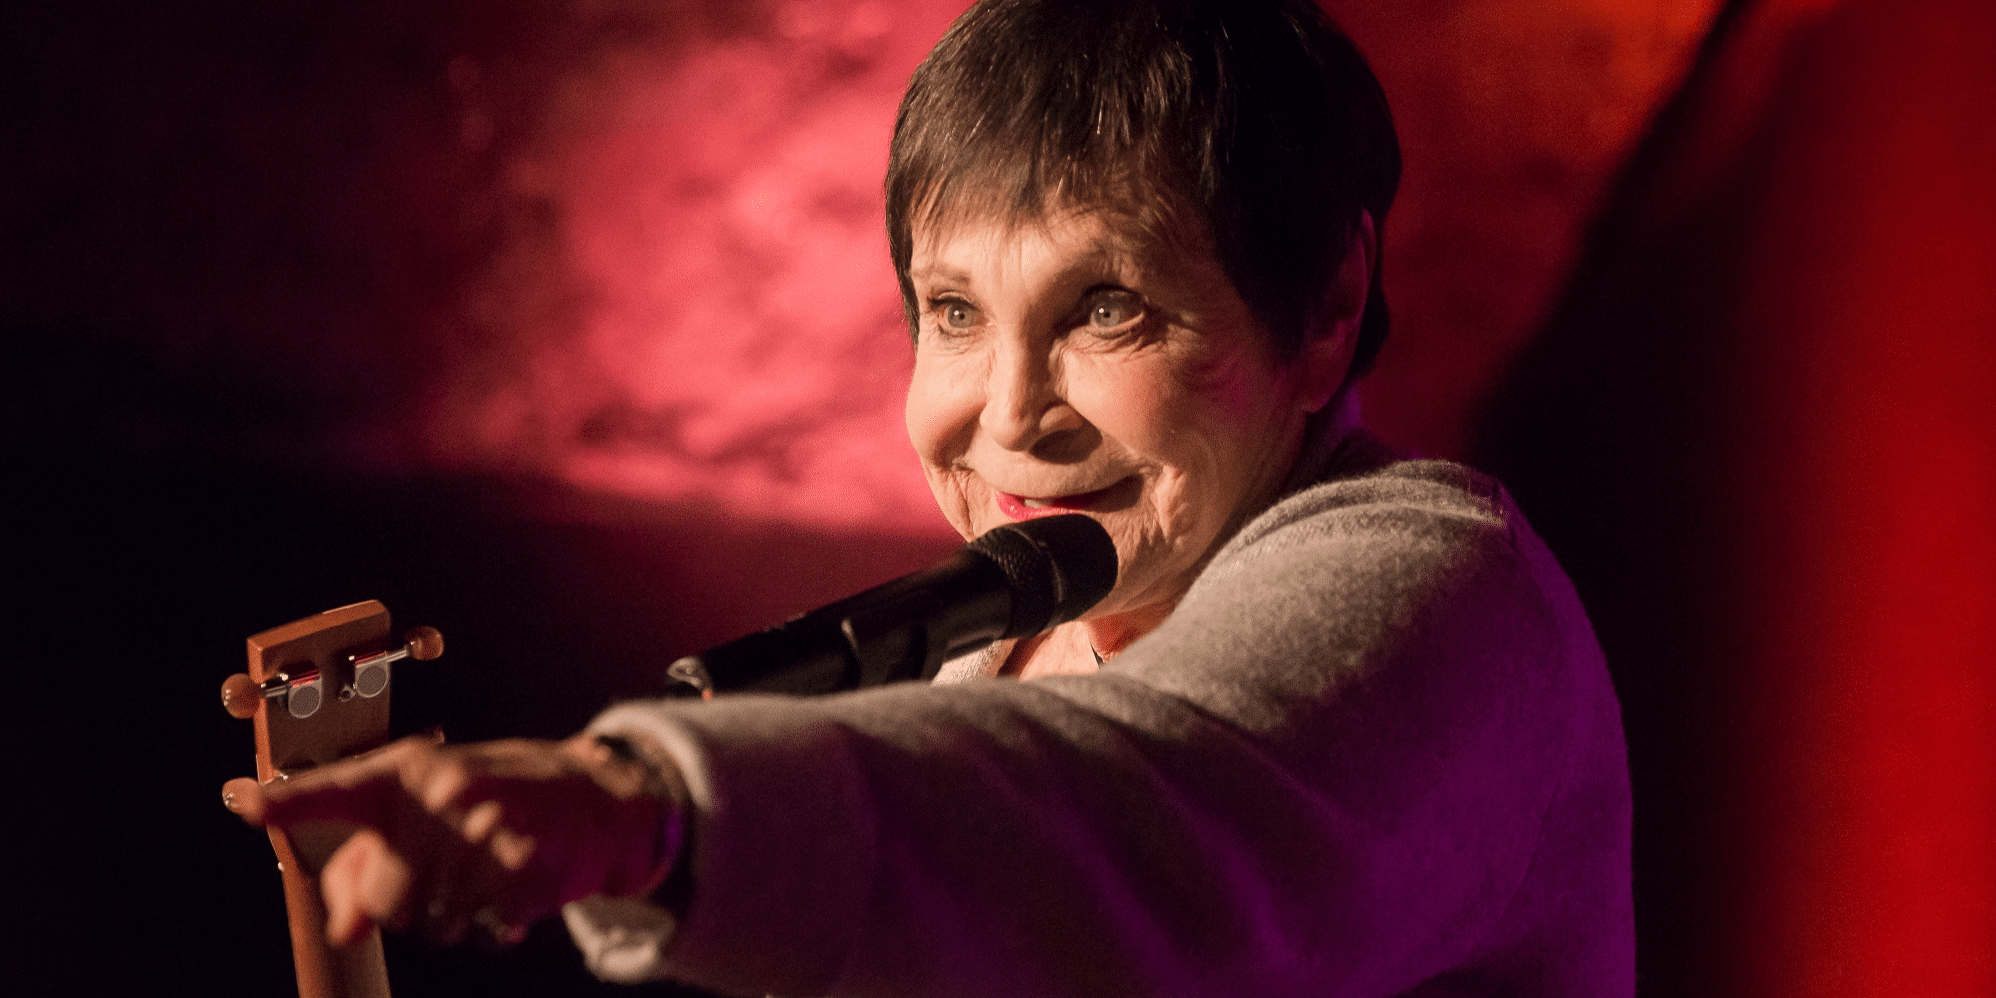 World's Oldest Working Female Comedian, D'yan Forest, Returns to Gotham Comedy Club